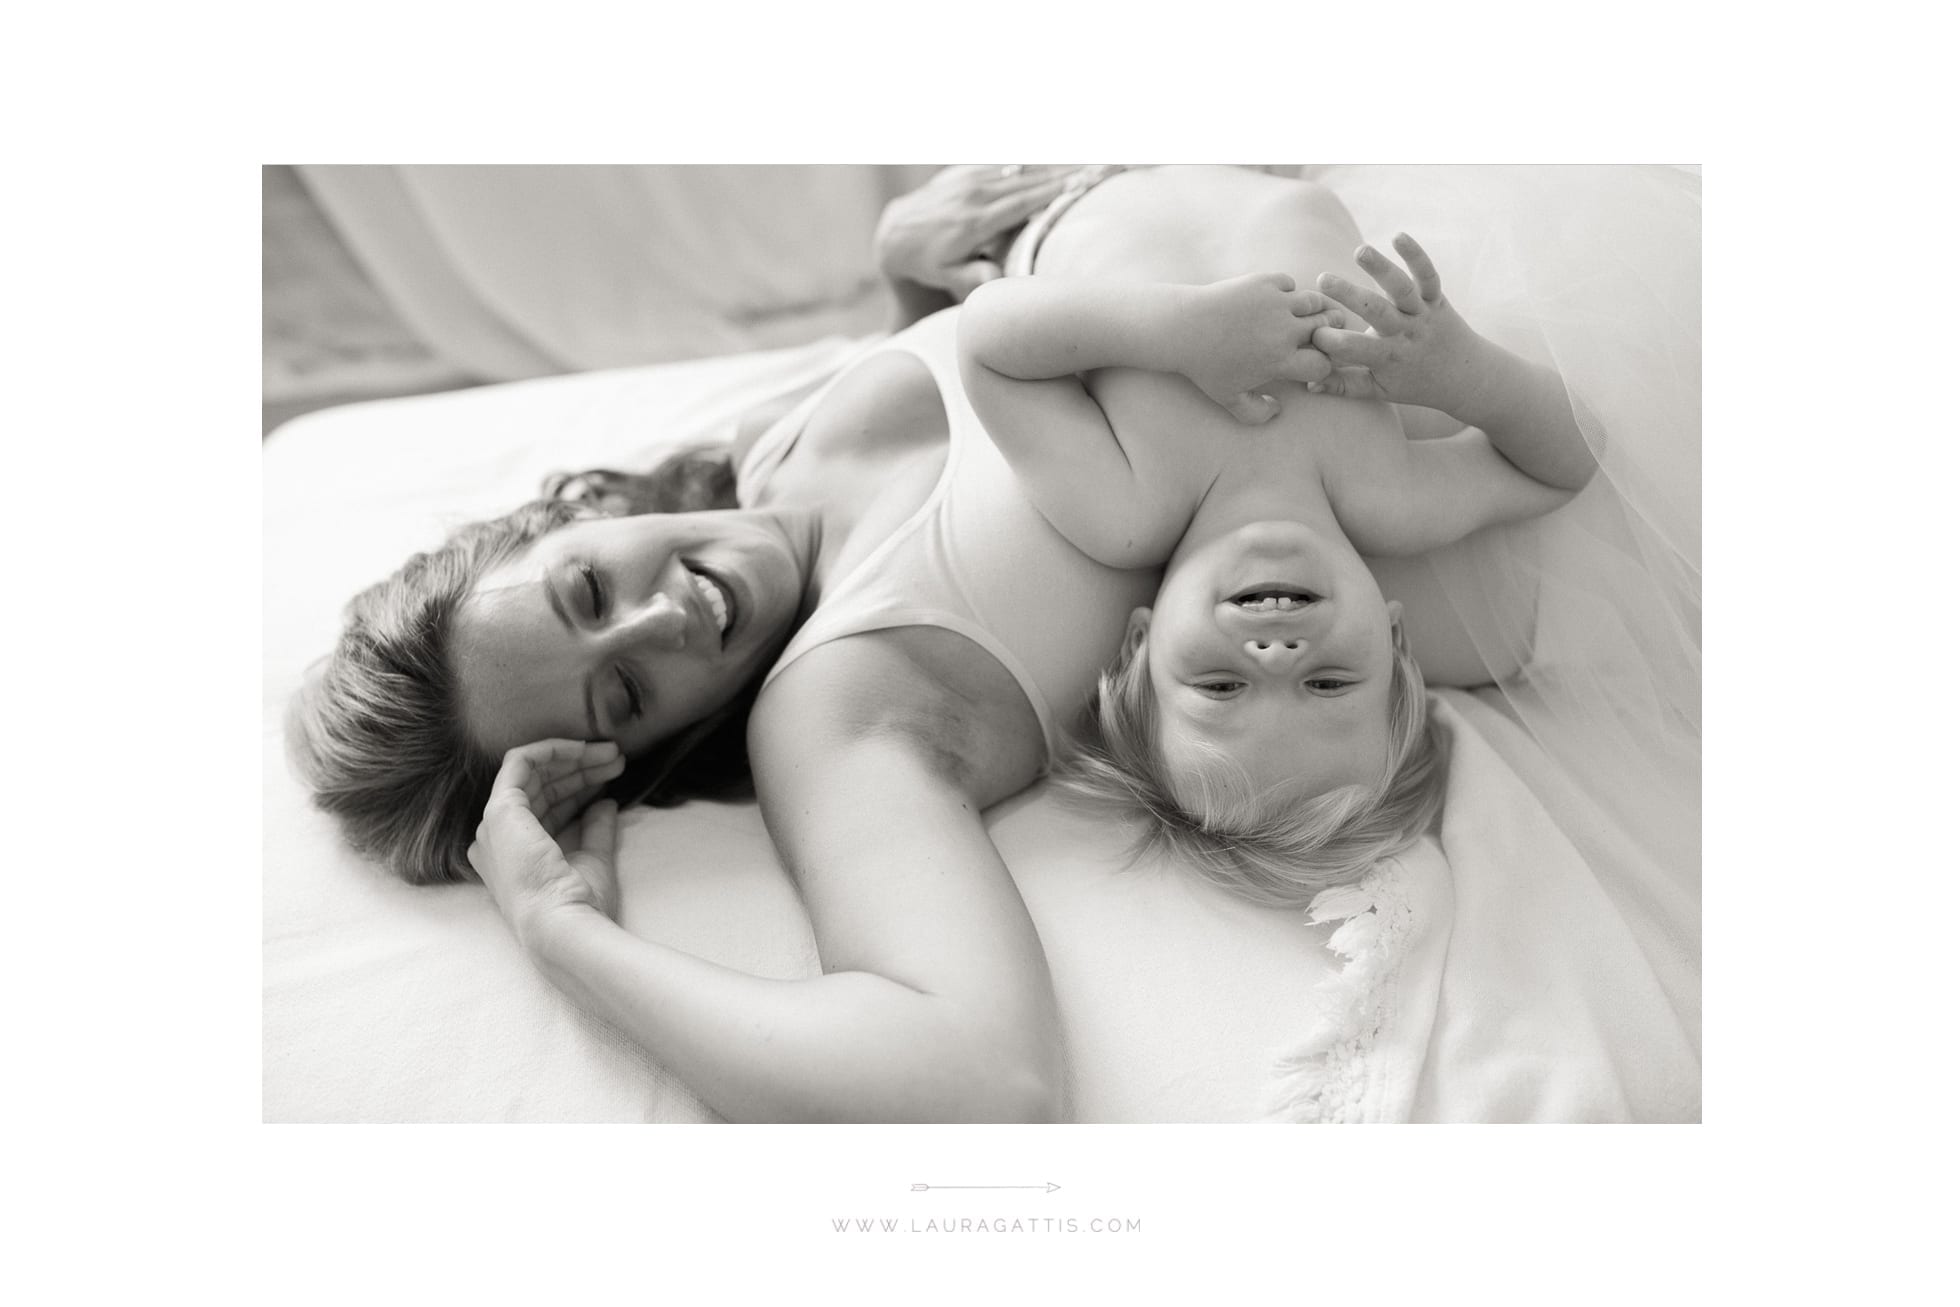 mother and child natural light studio session | vsco | laura gattis photography